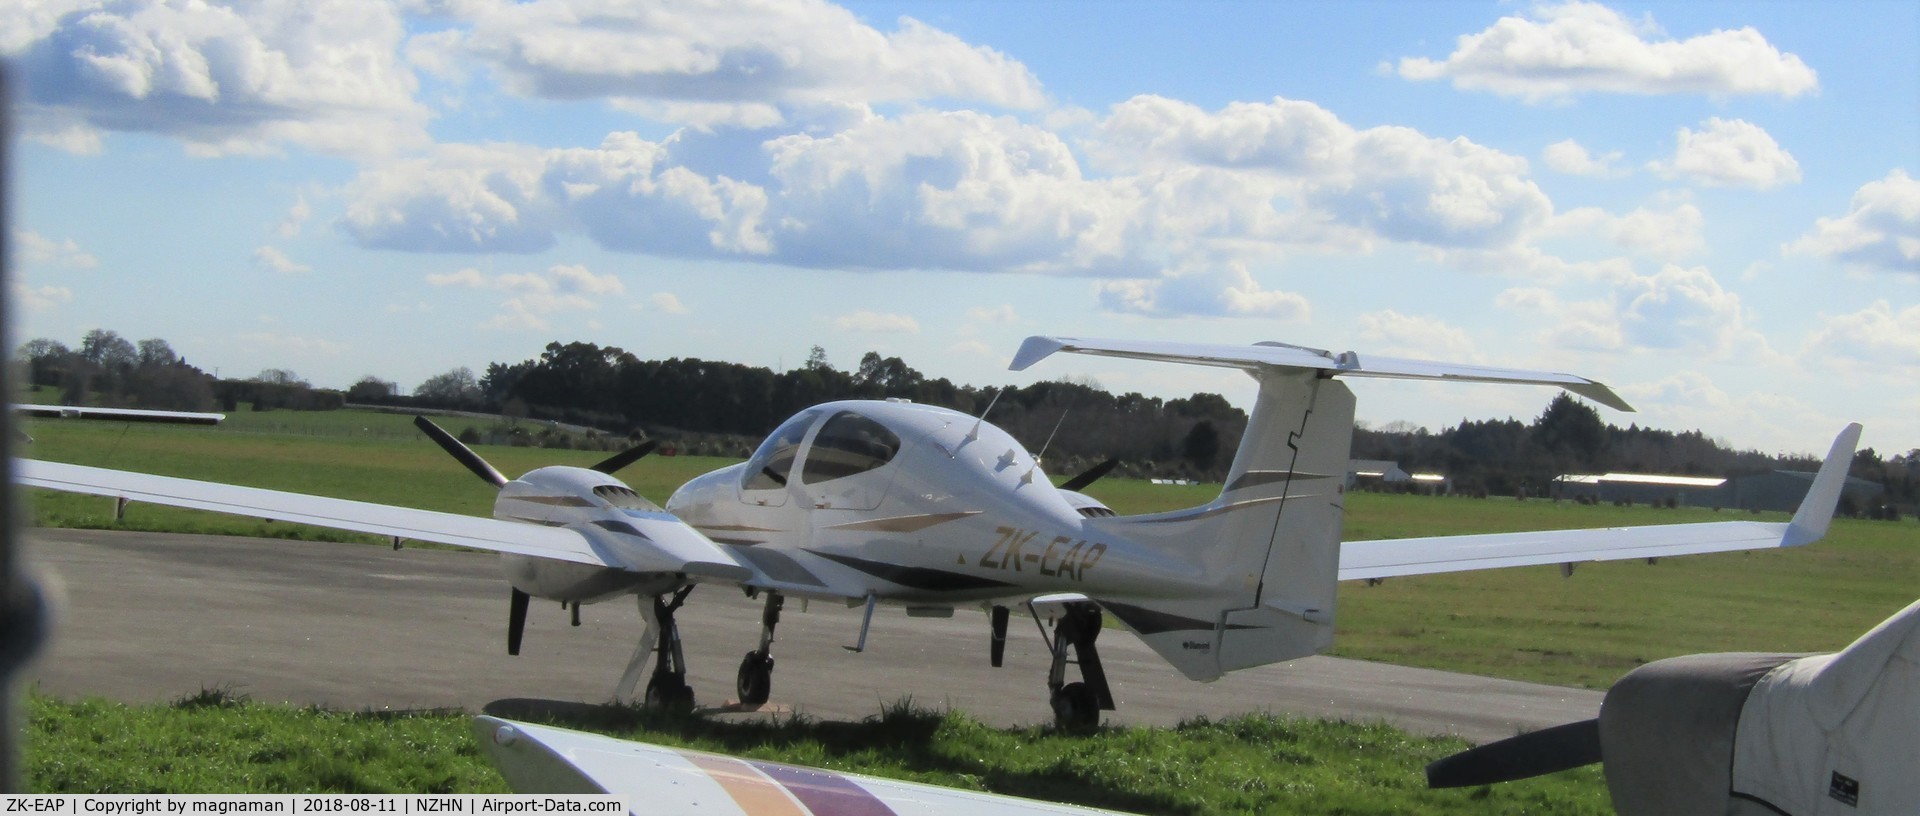 ZK-EAP, Diamond DA-42 NG Twin Star C/N 42.258, new to ardmore flying school - here prepped at Hamilton